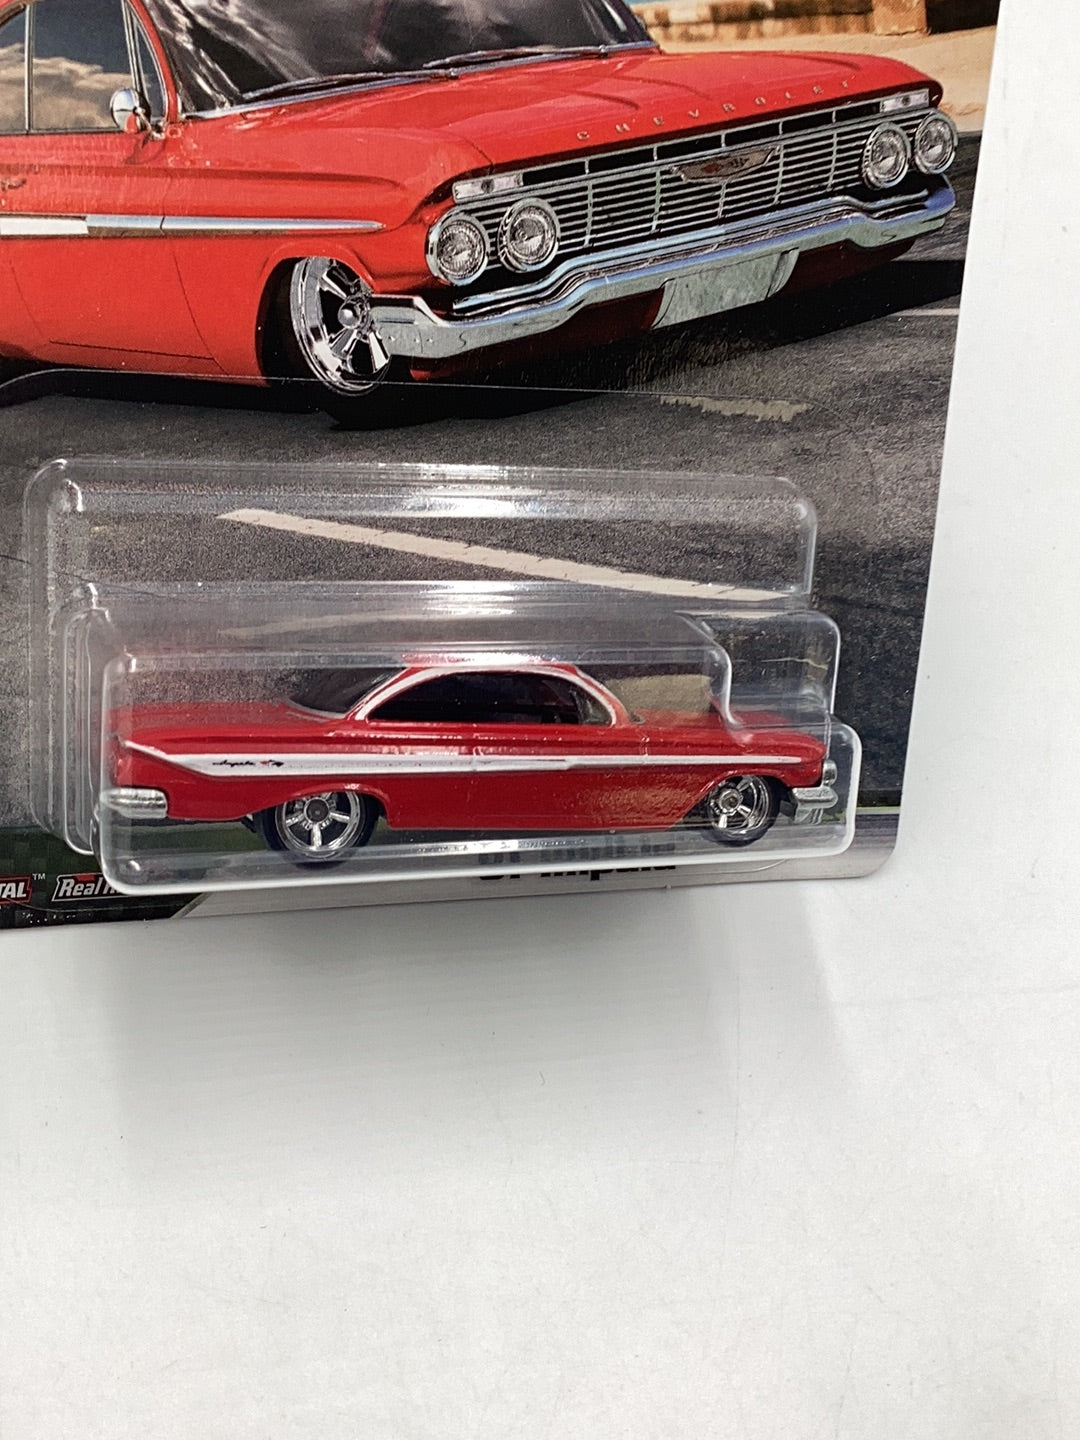 Hot wheels  fast and furious Motor City Muscle 61 Impala 5/5 249C